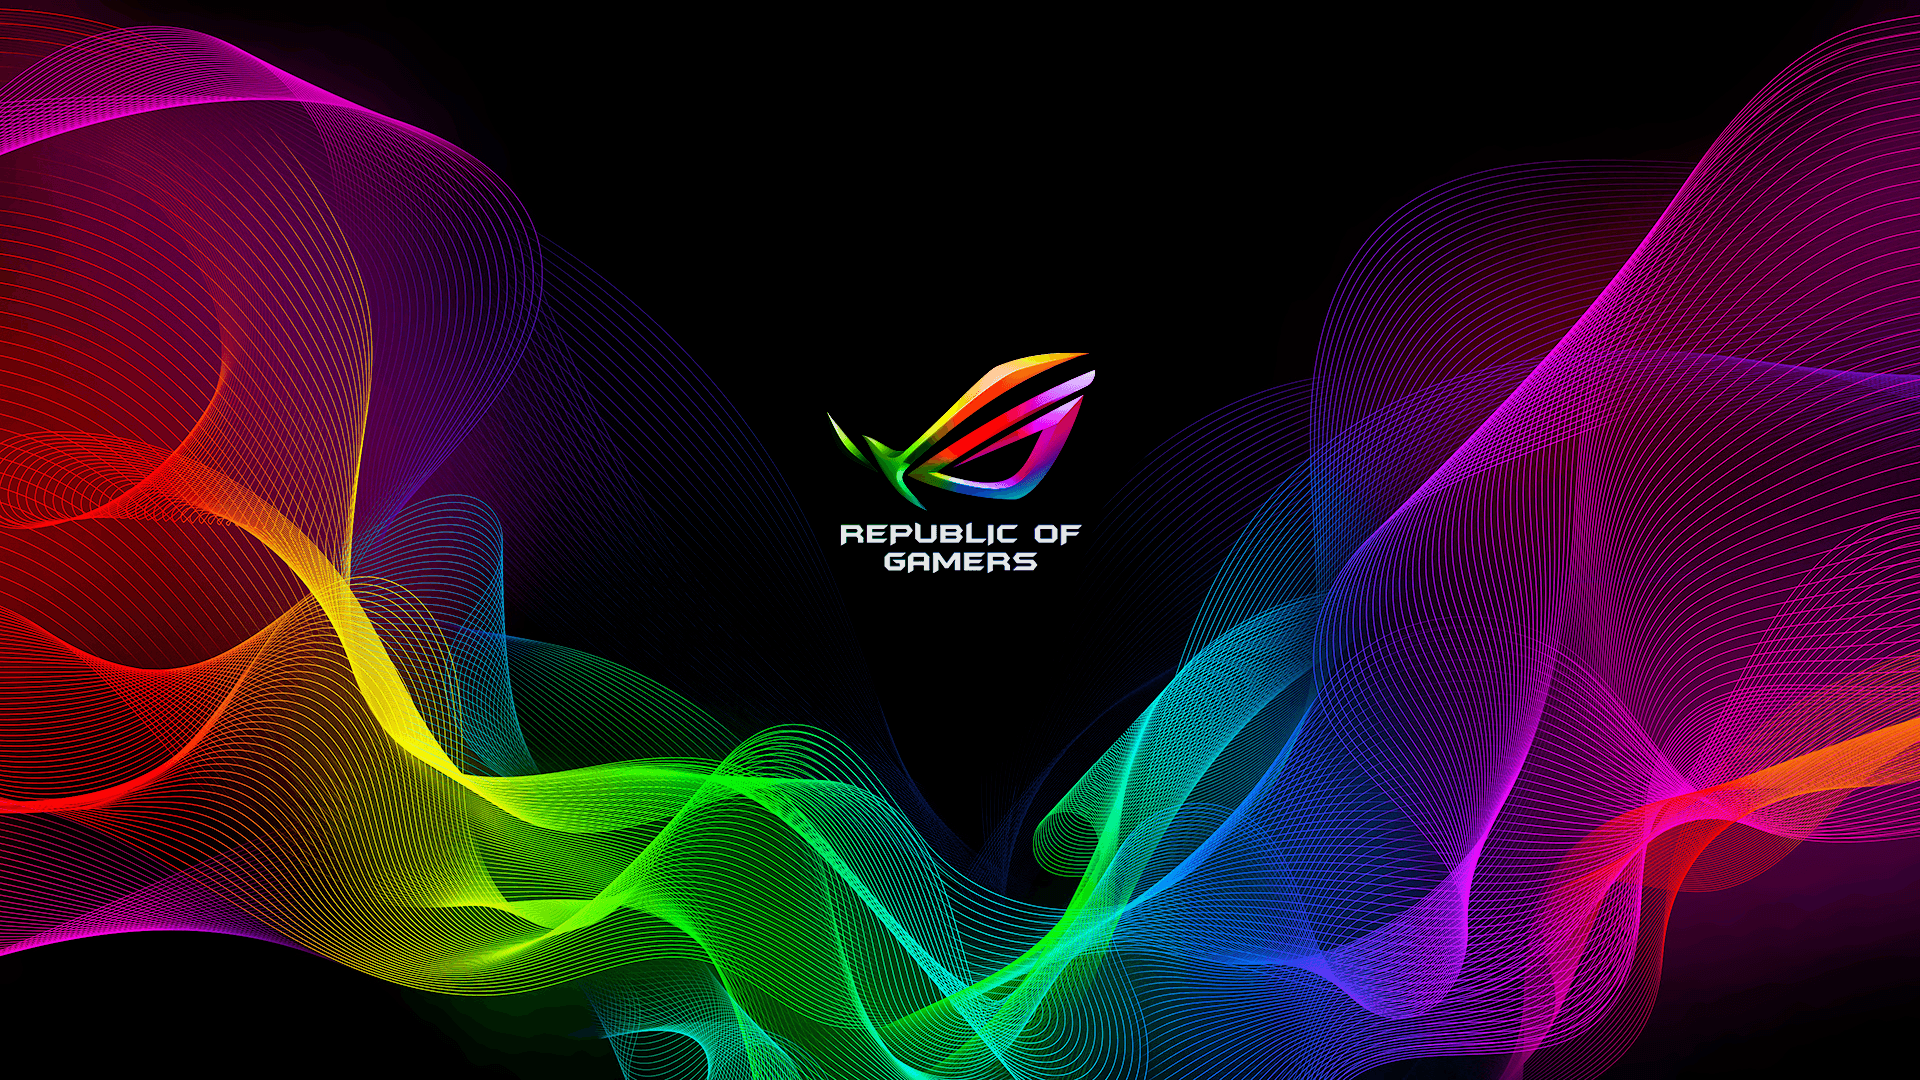 RGB ROG wallpaper based on the one from Razer